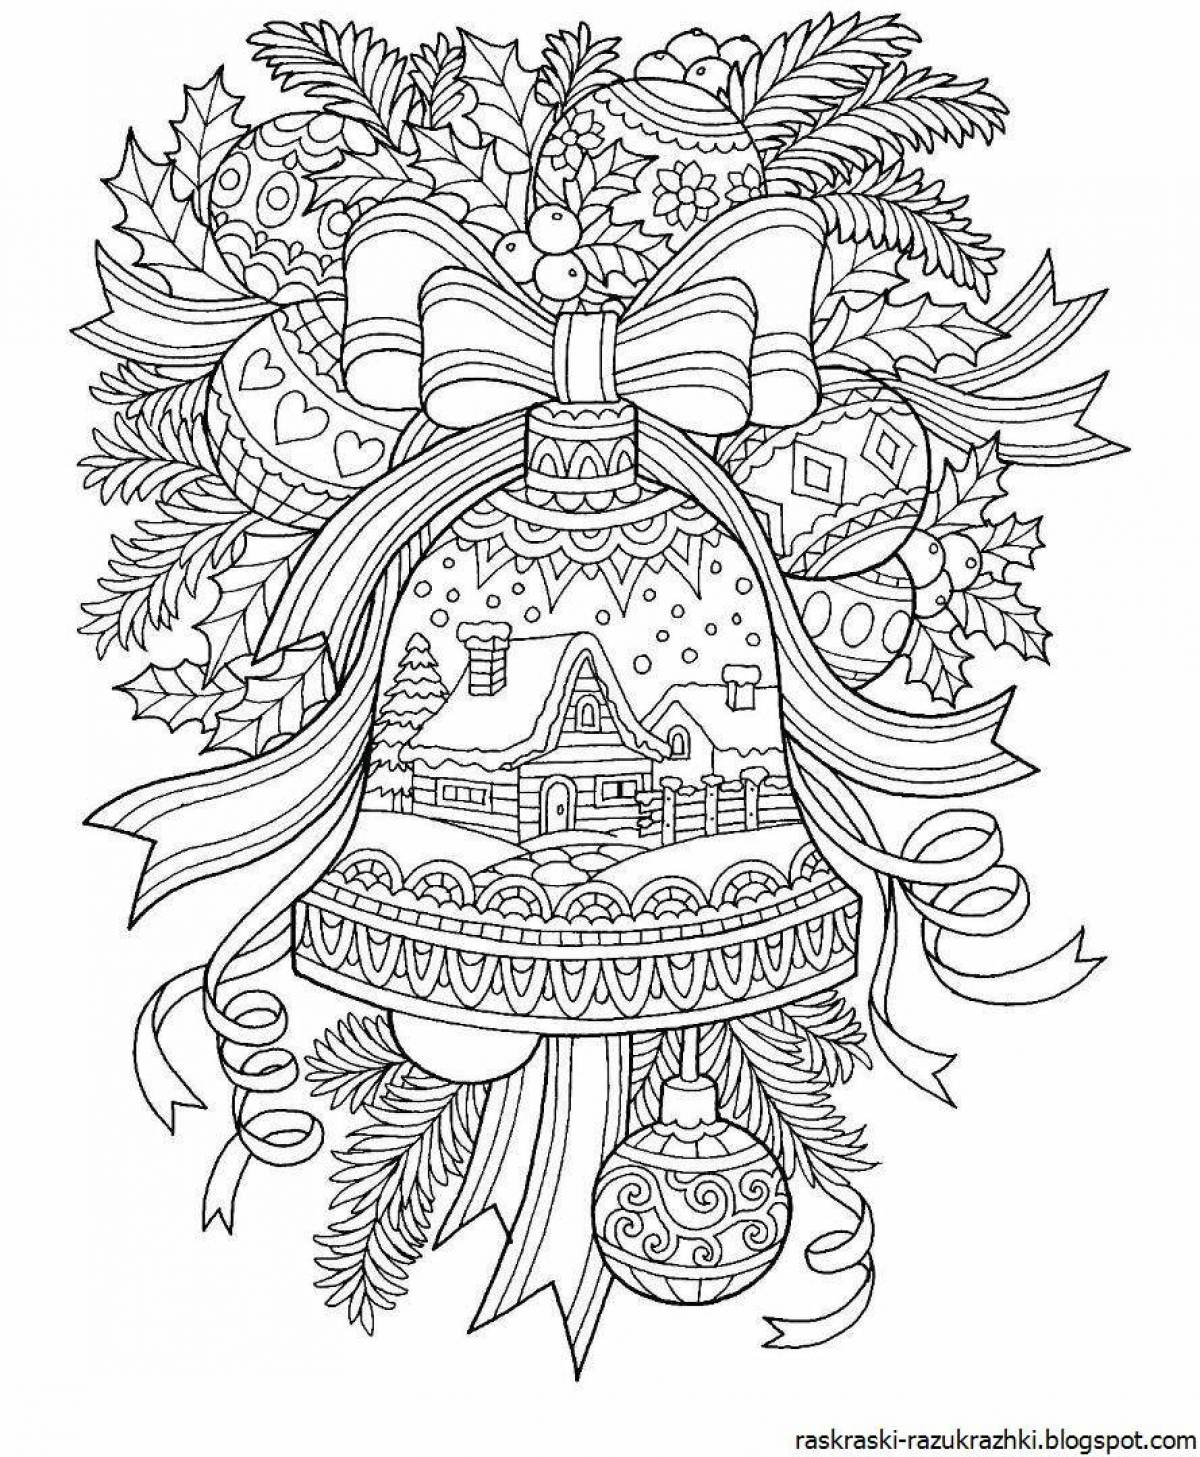 Shrill anti-stress Christmas coloring book